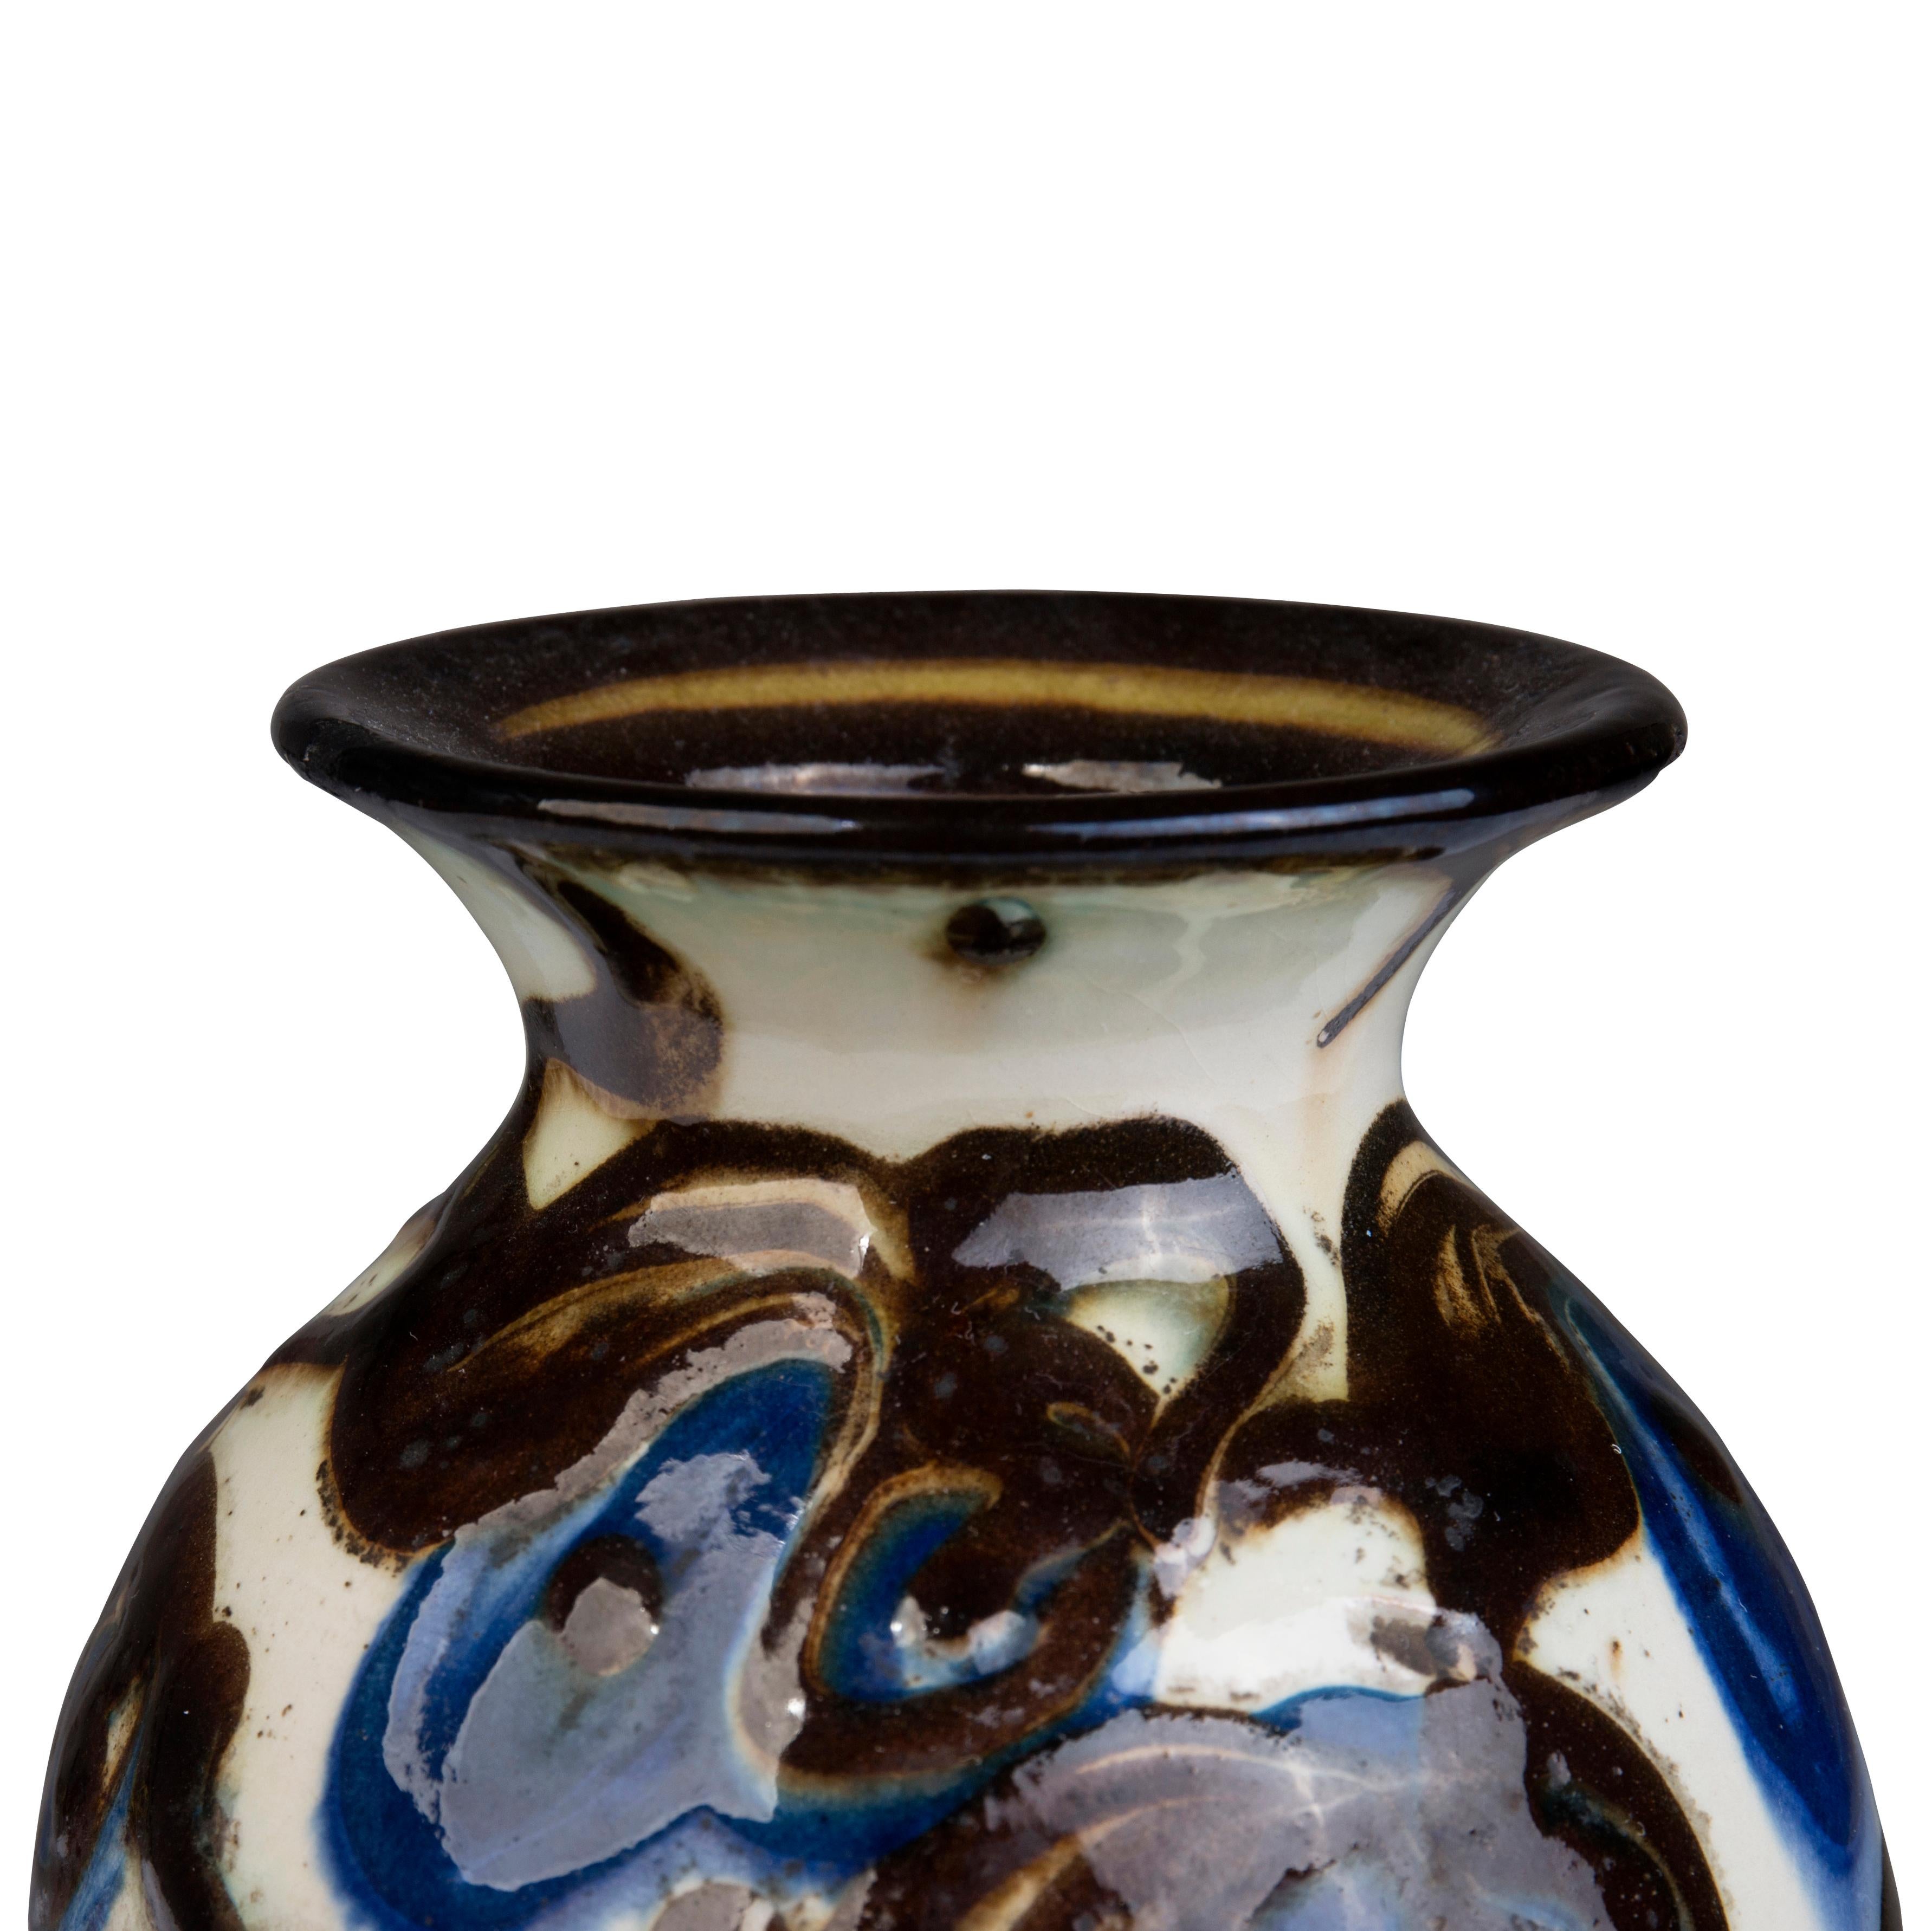 This smaller earthenware vase by Herman A. Kähler is horn-decorated with blue flowers on a light base. 

When Herman H. C. Kähler took over the family company in 1917 as the third generation of Kähler leadership, he reintroduced horn painting. This